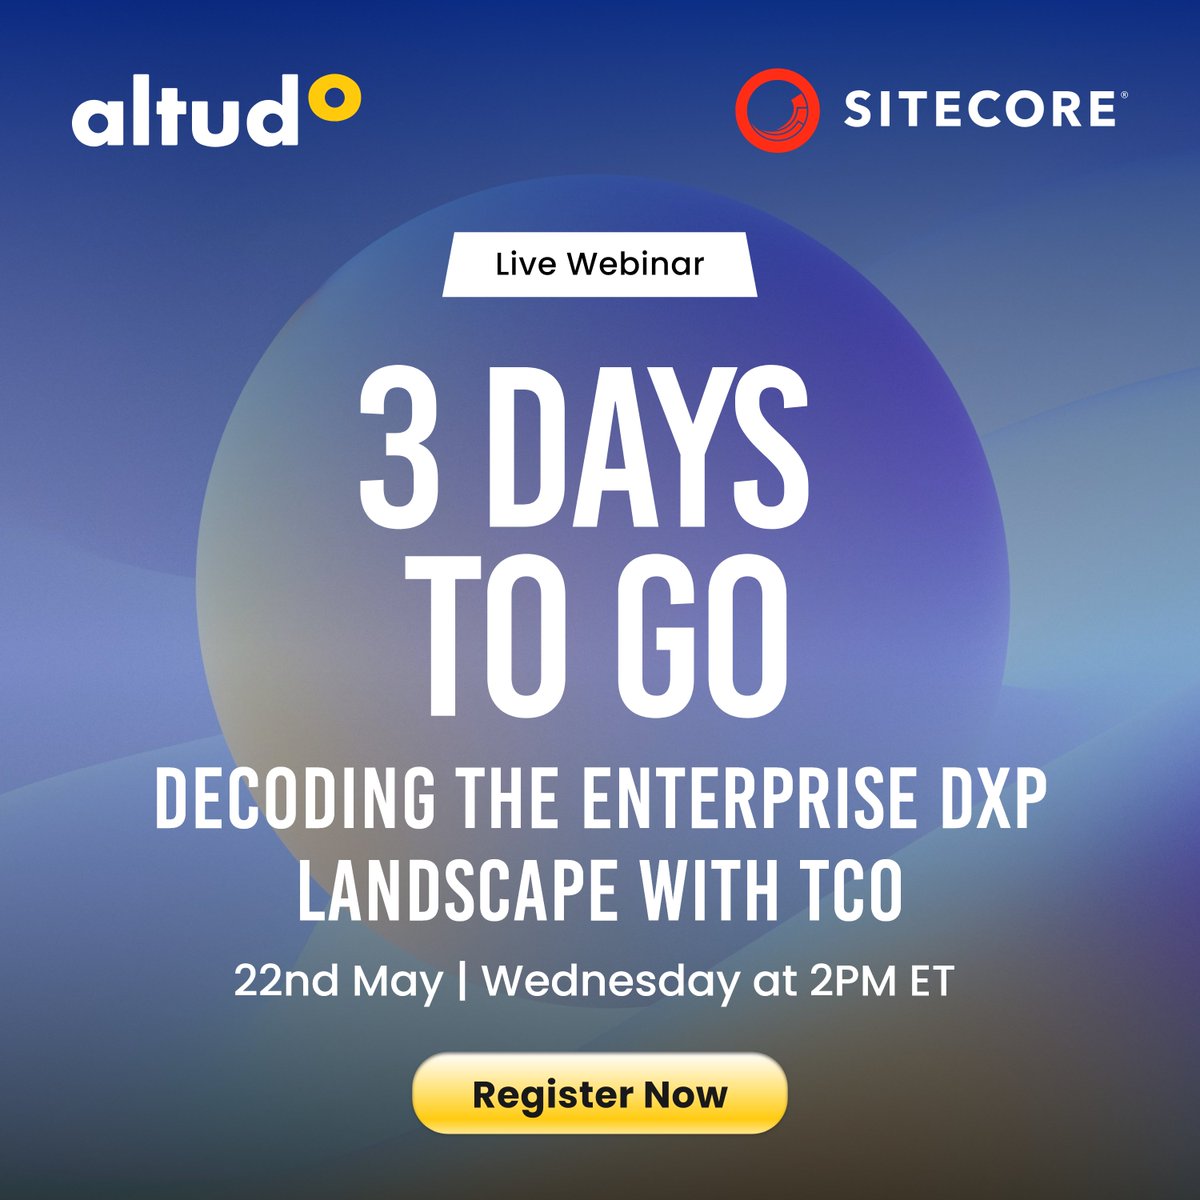 T-minus 3 for our upcoming webinar with #Sitecore where our presenters will discuss the current trends of #DXP industry, and what the future holds. Secure your spot today: altudo.co/insights/webin…

#CX #DX #CMS #SitecoreCMS #SitecorePartner #AltudoWebinars